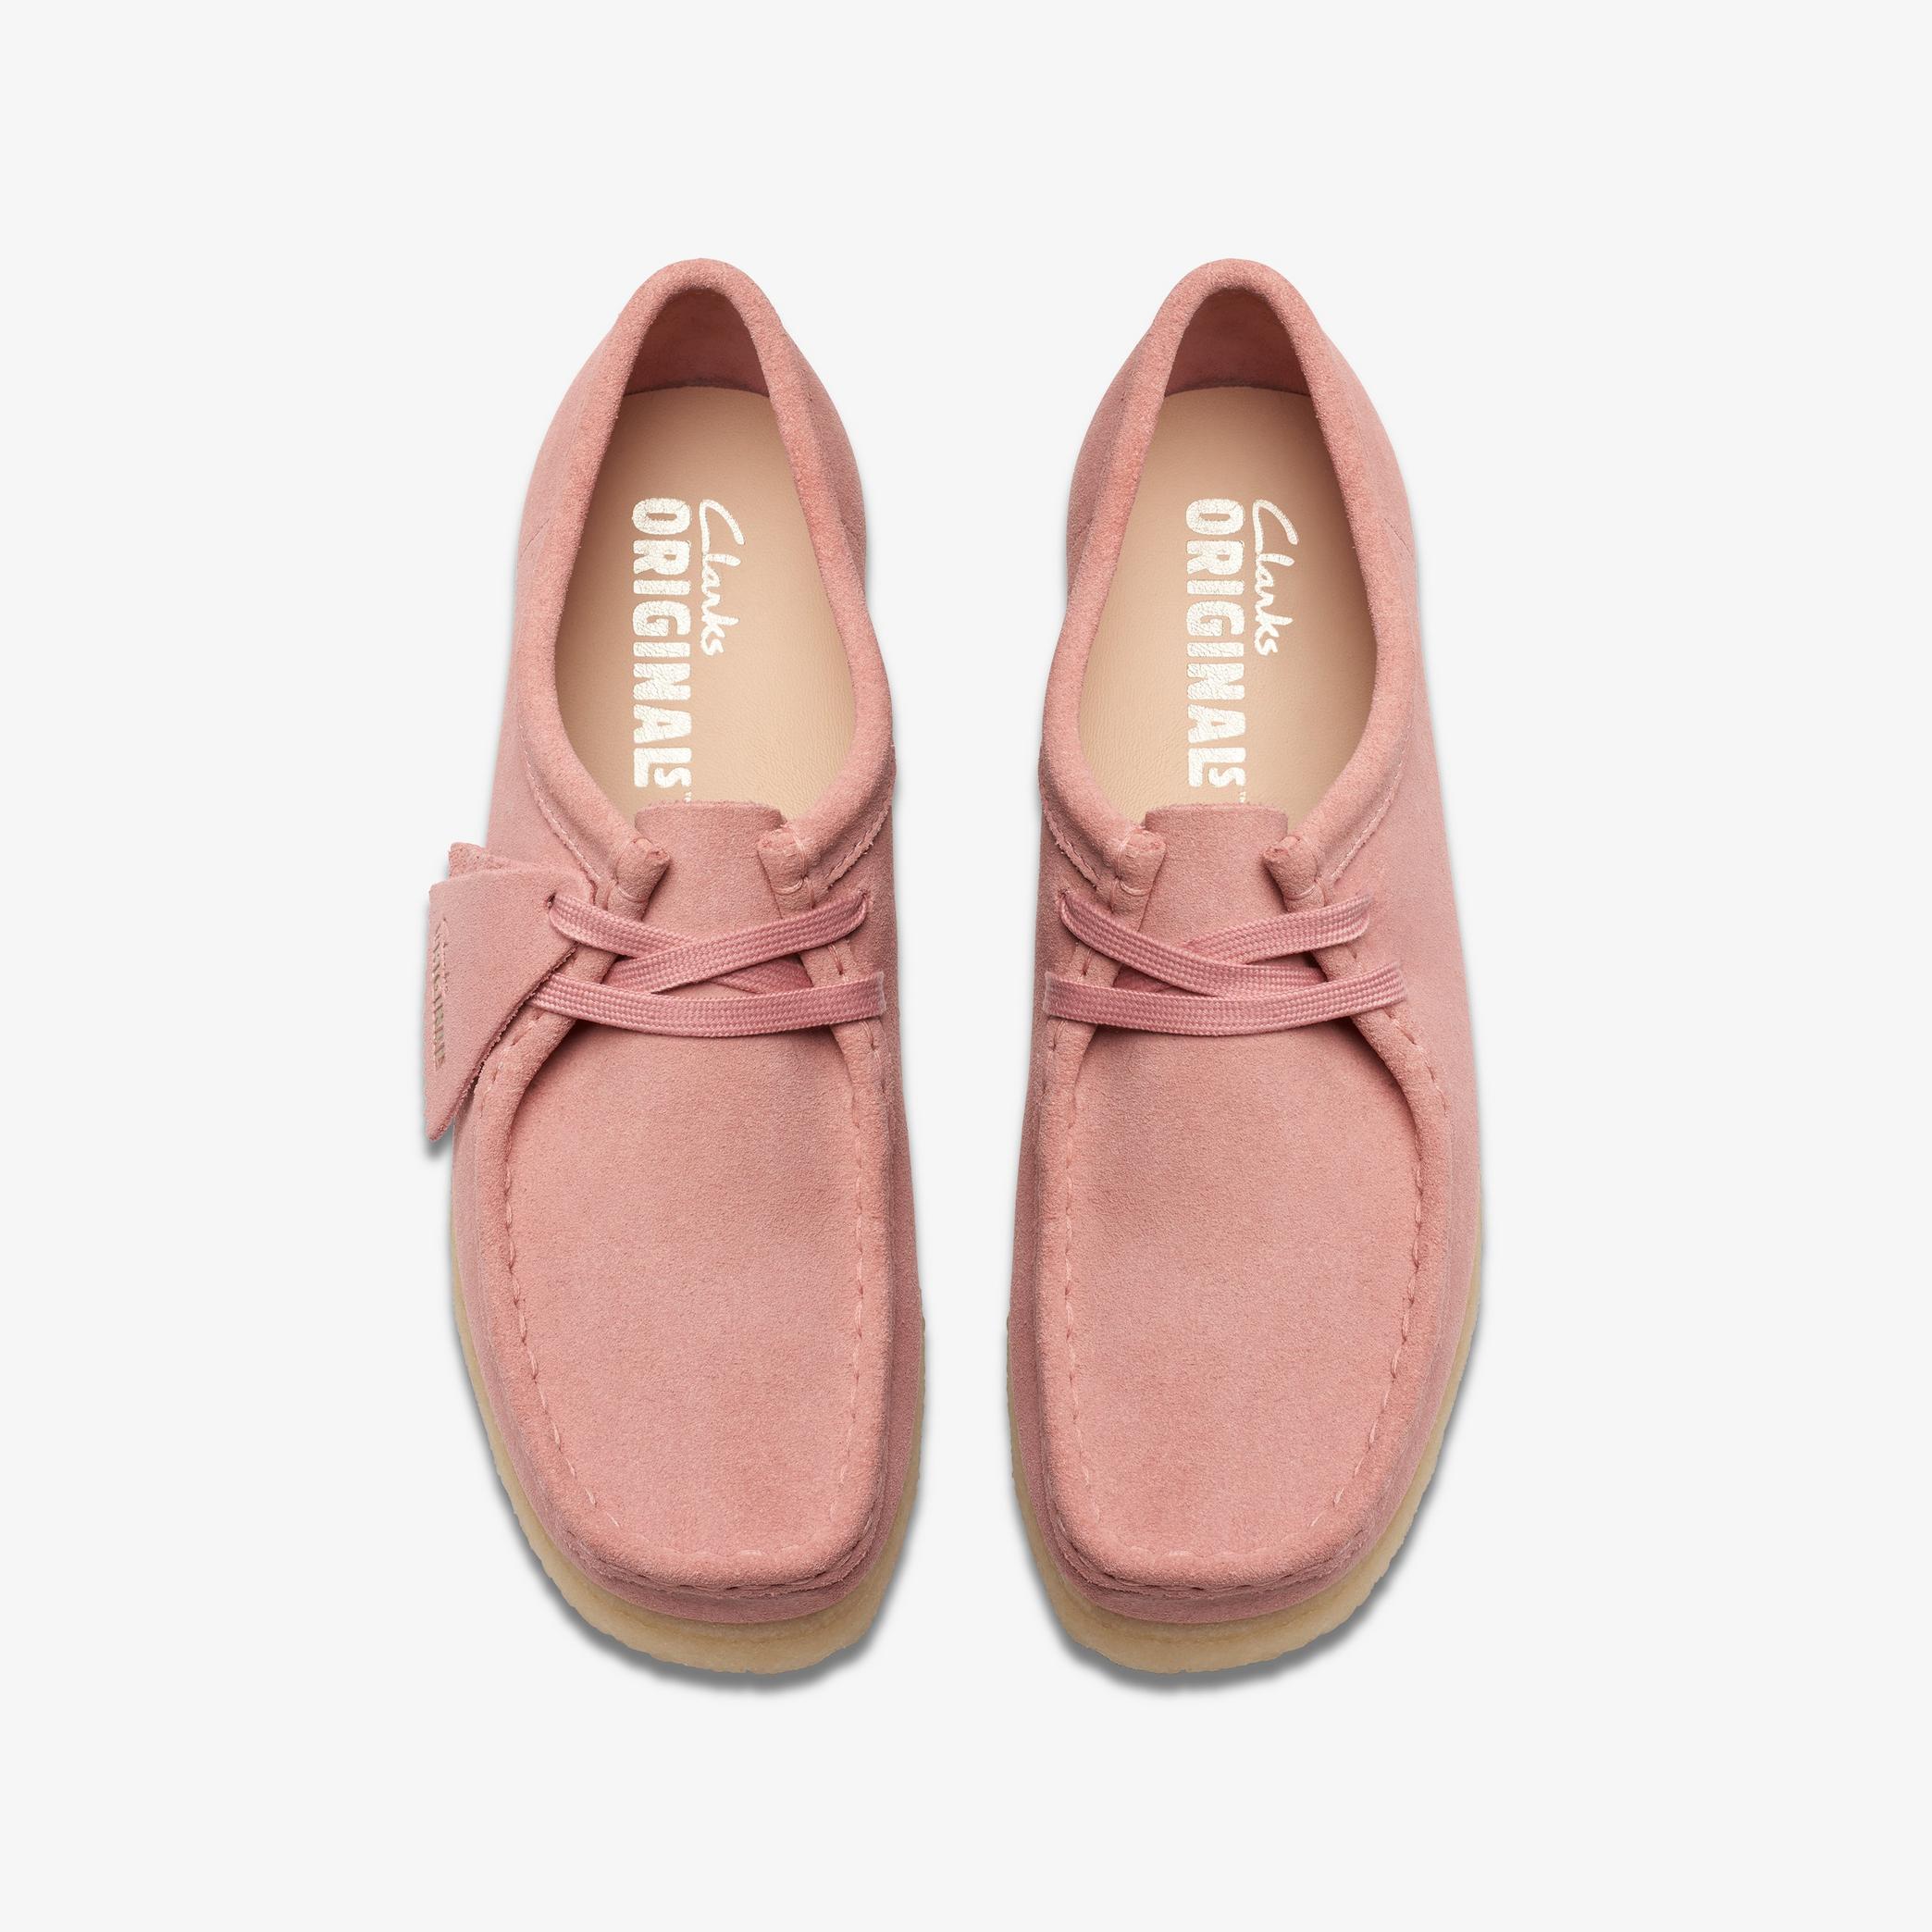 Wallabee Blush Pink Suede Wallabee, view 6 of 7